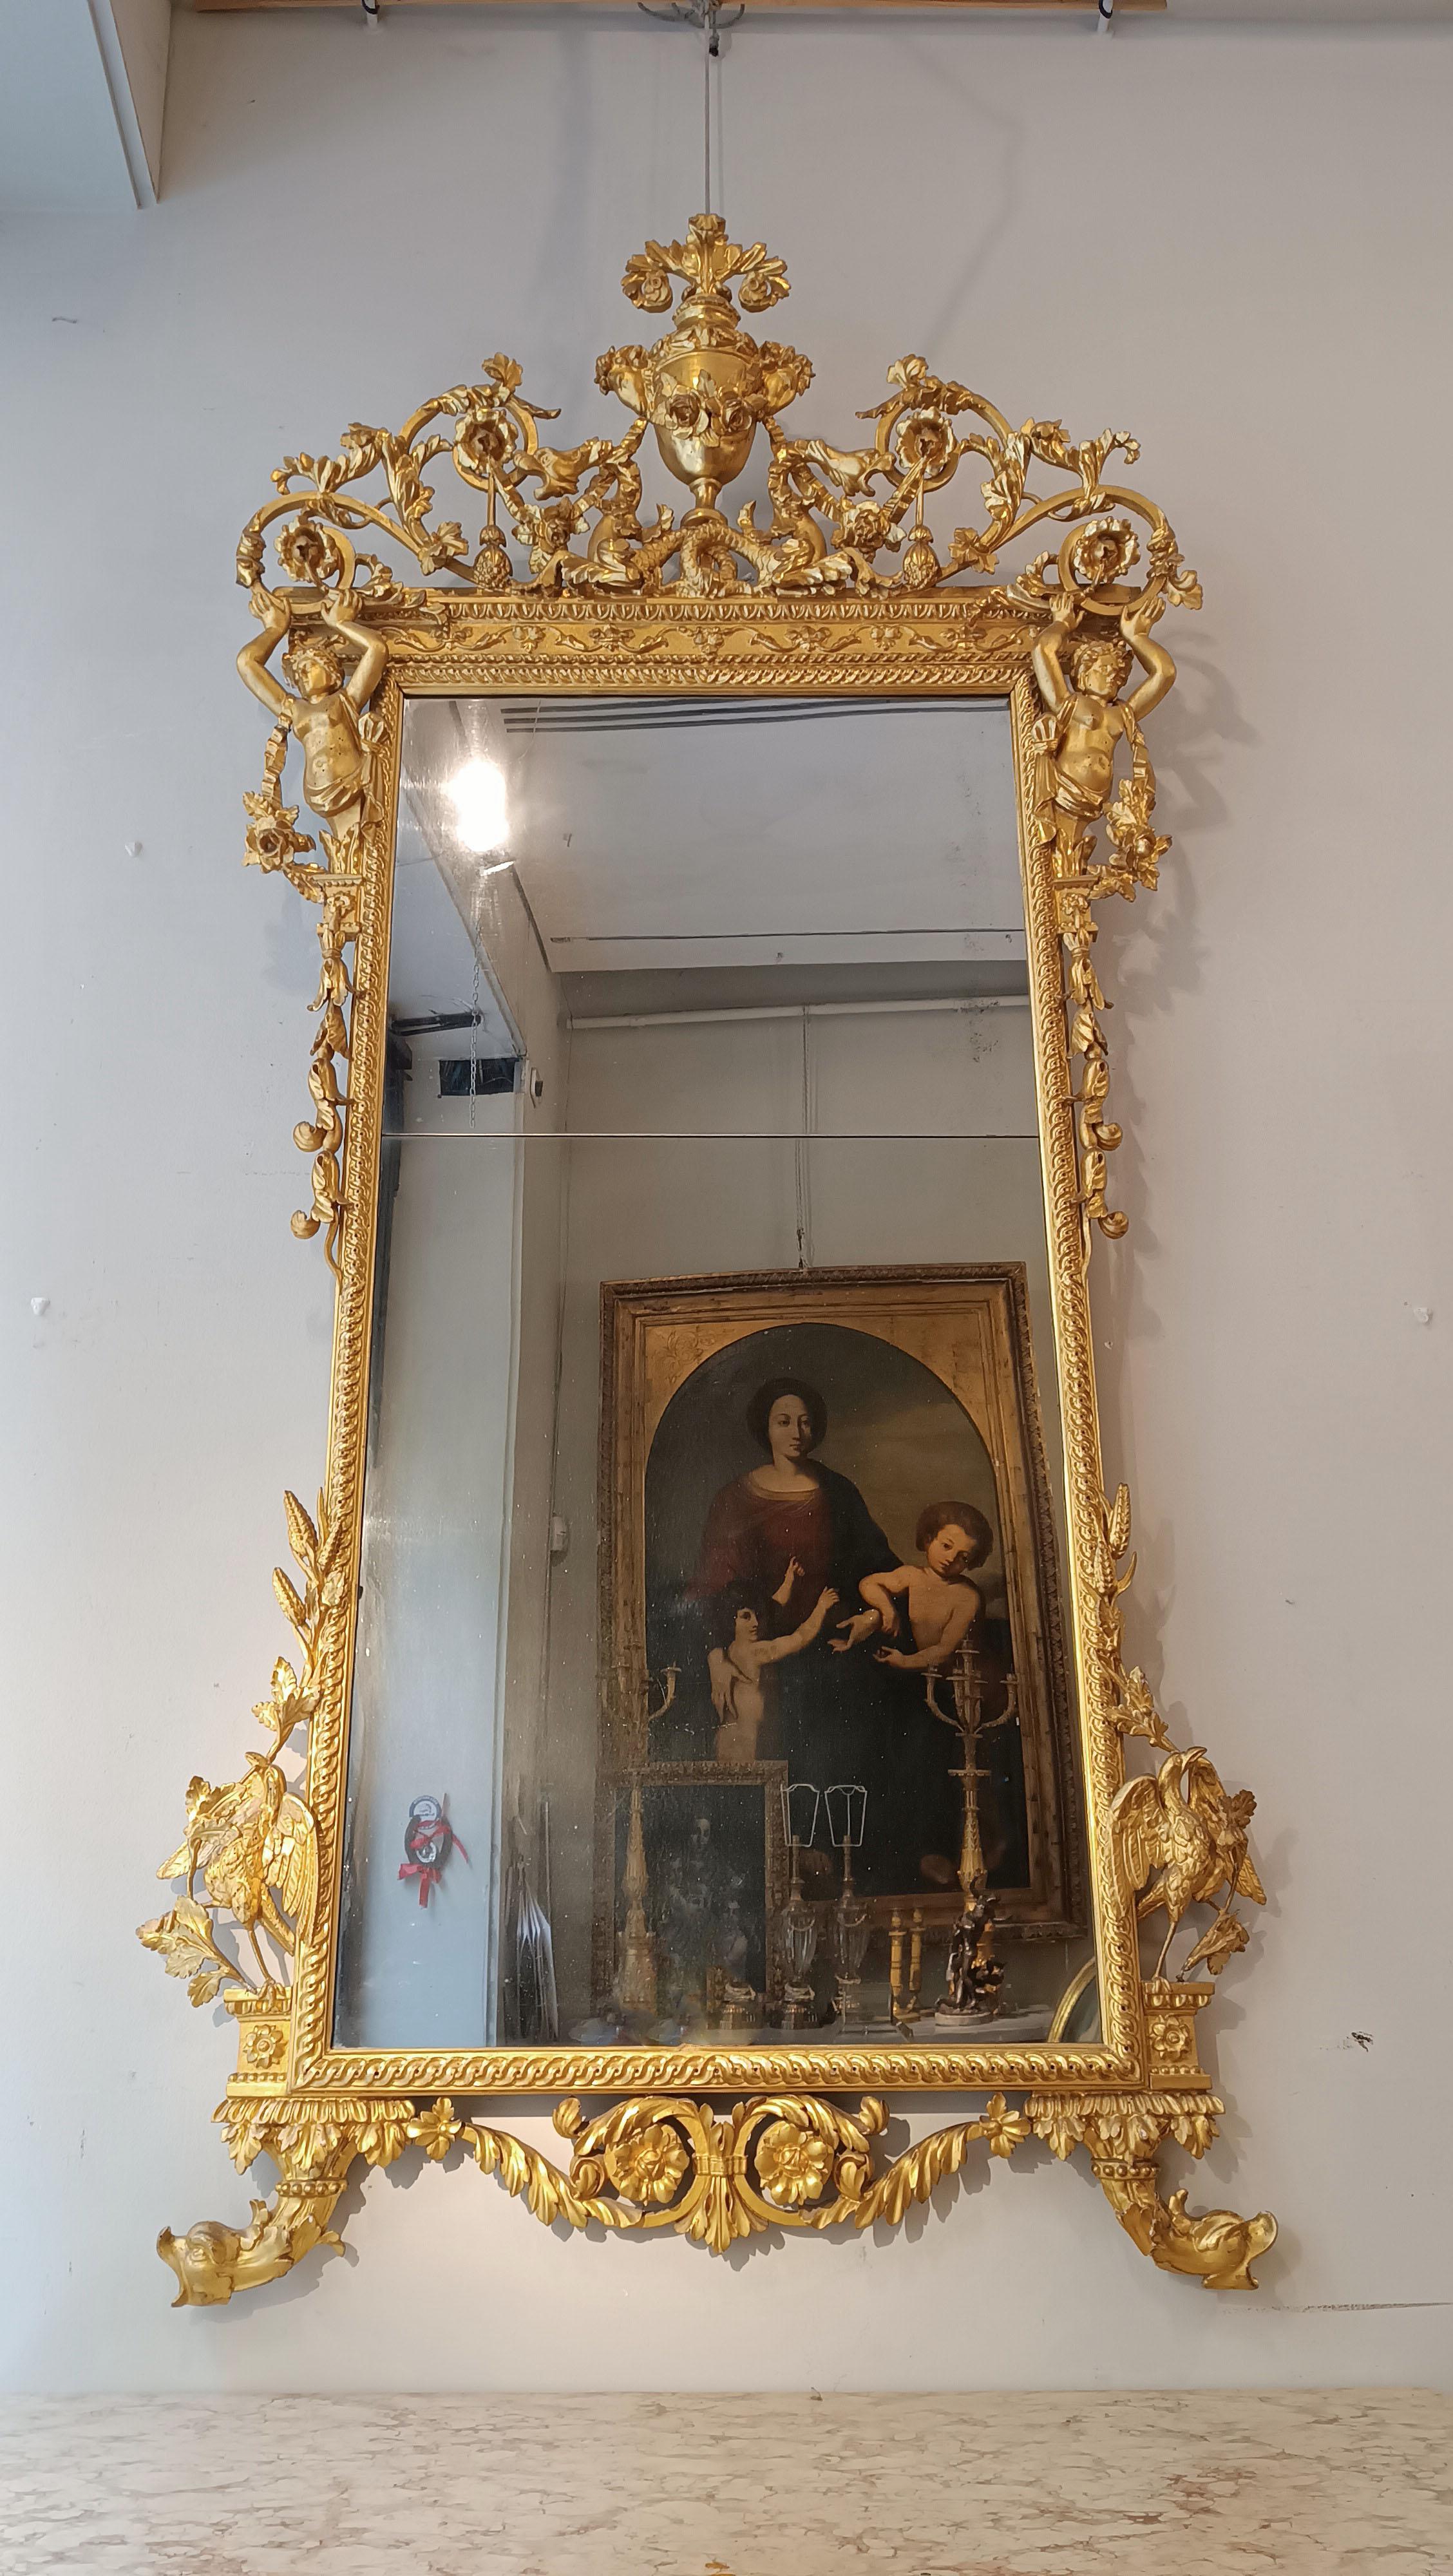 Neoclassical Revival 18th CENTURY NEOCLASSICAL MIRROR  For Sale